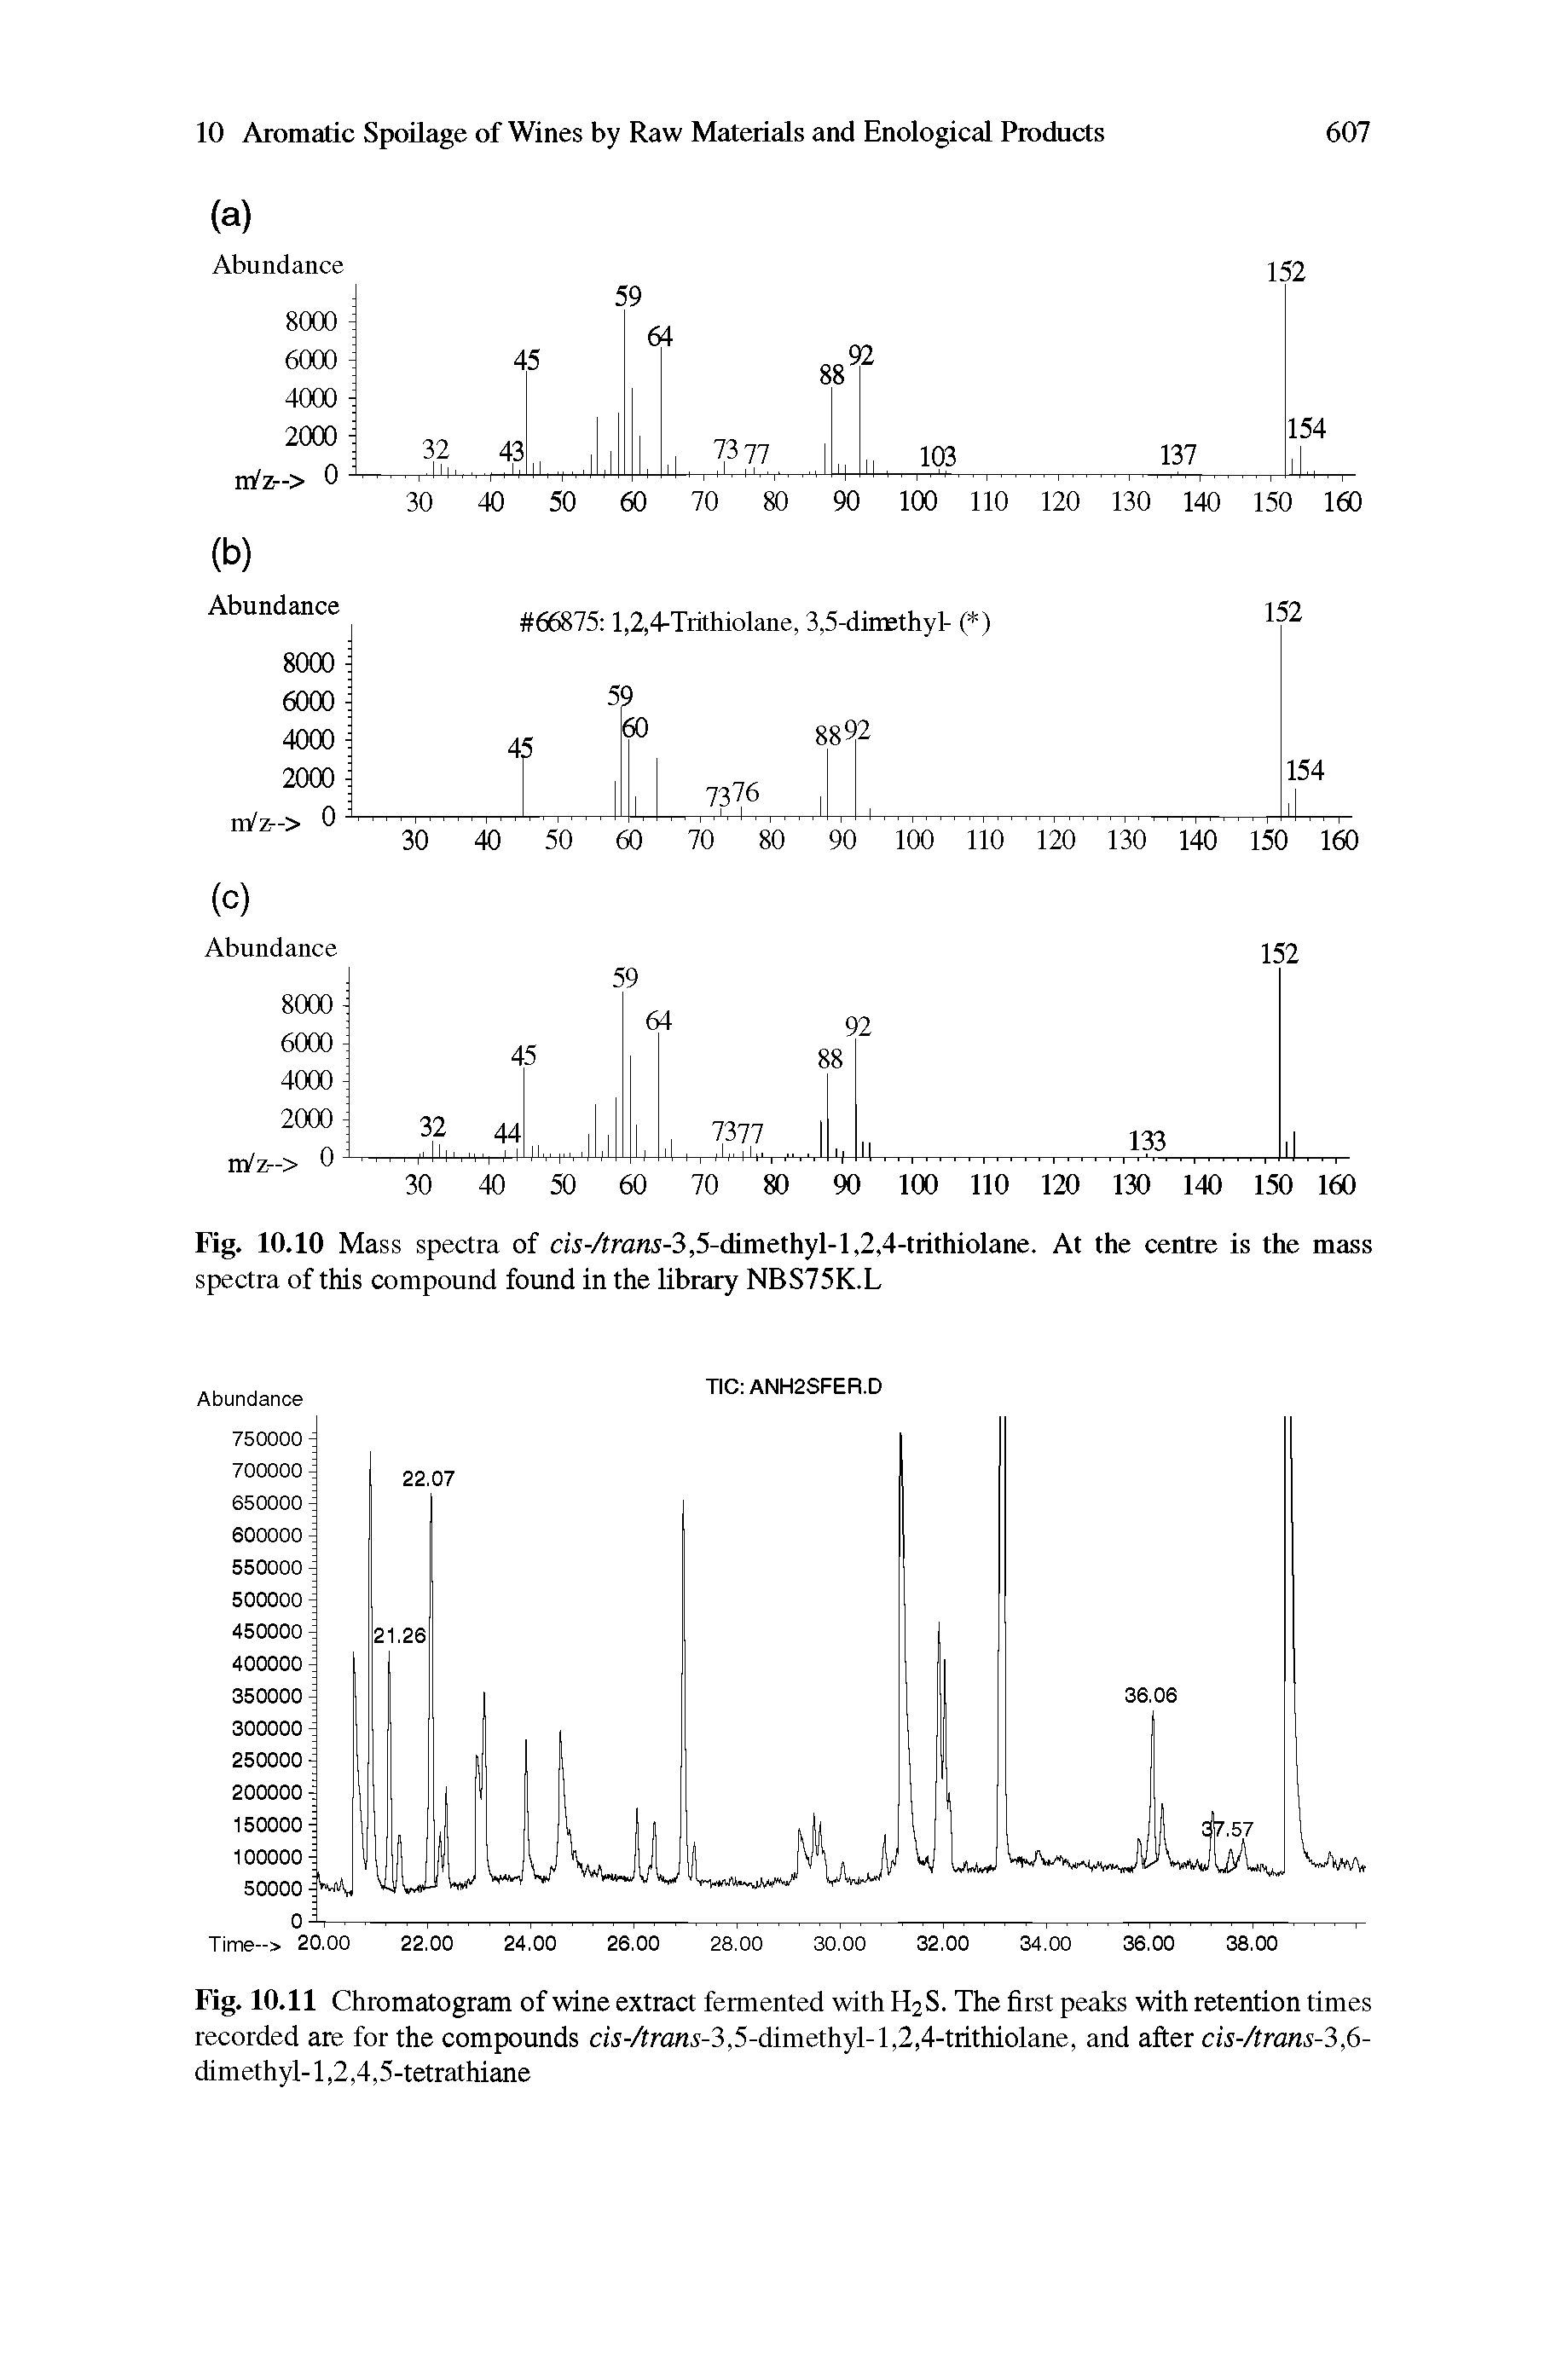 Fig. 10.11 Chromatogram of wine extract fermented with H2S. The first peaks with retention times recorded are for the compounds c/5-/fra 5-3,5-dimethyl-l,2,4-tiithiolane, and after cis-/tmns-3,6-dimethyl-l,2,4,5-tetrathiane...